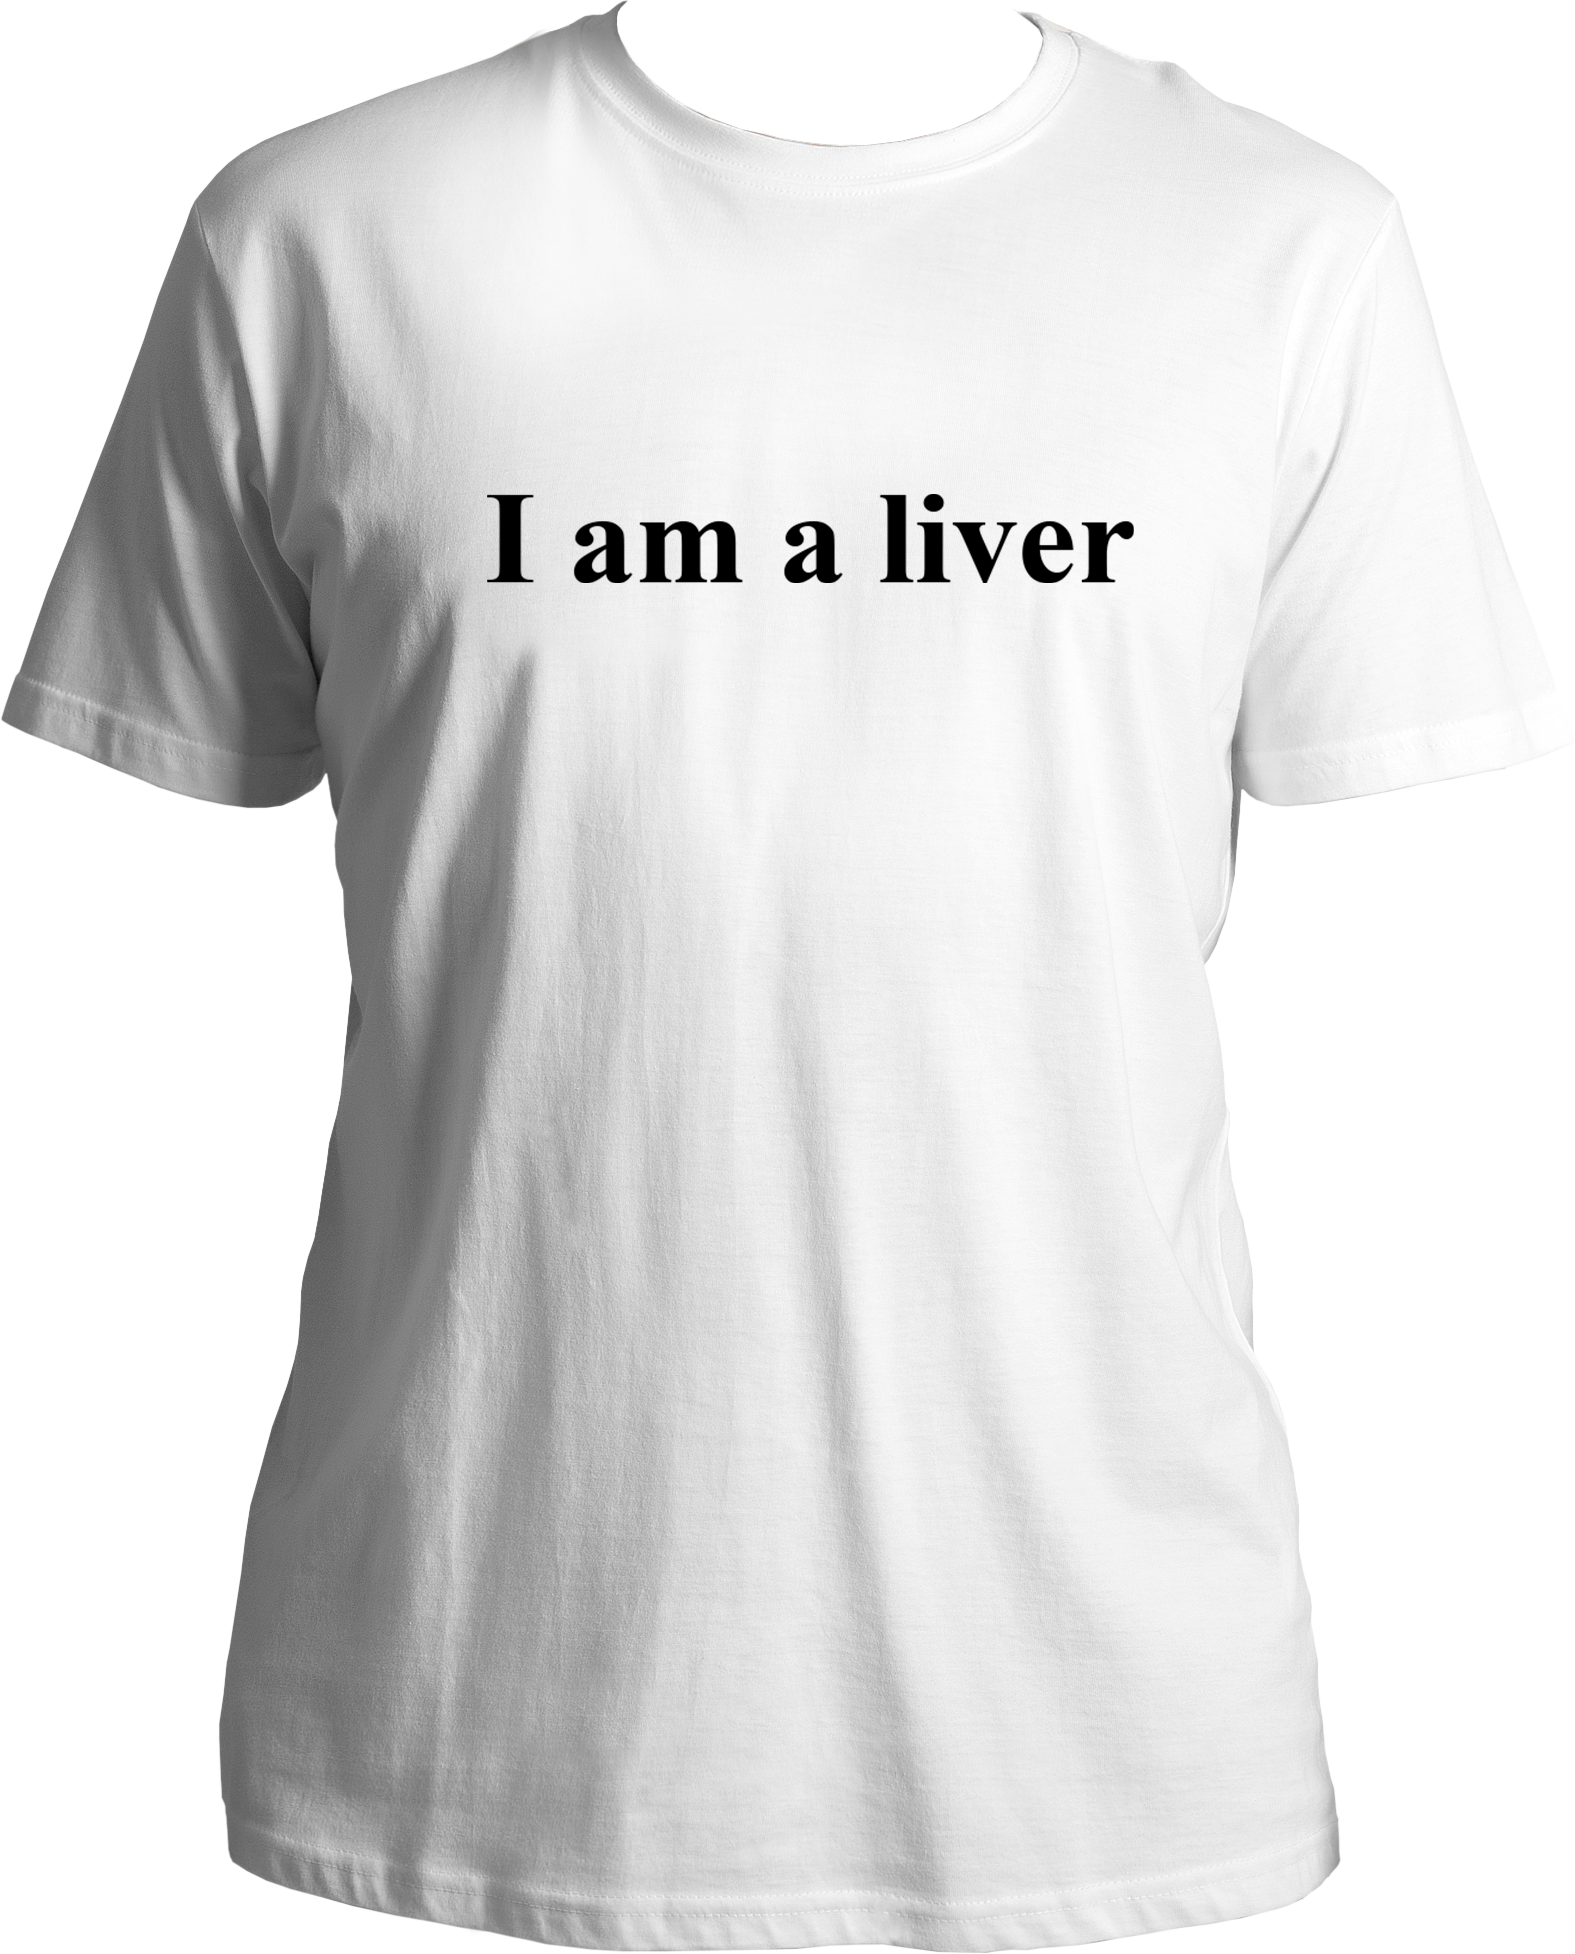 Famous Orry's Famous quote, I Am A Liver Unisex Cotton T-Shirt for you all. So if you also like orry who is a liver, this is a must wear for you. Grab your I Am A Liver T-Shirt Right now